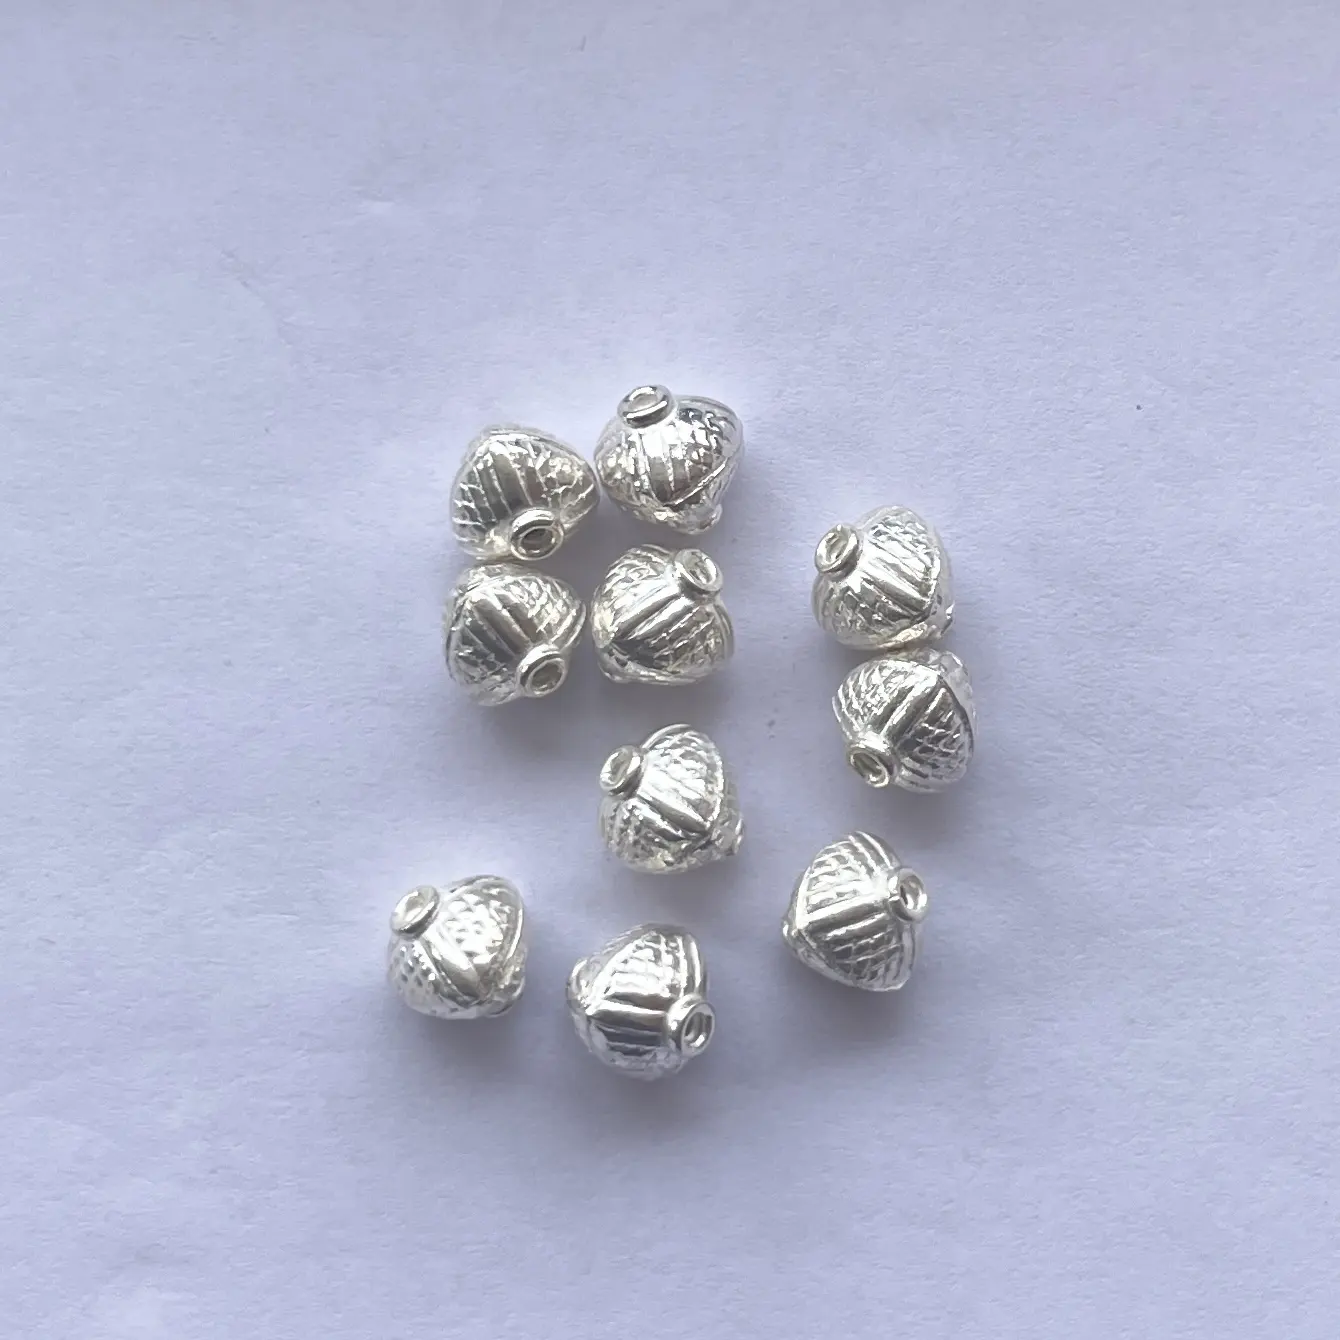 8mm 925 Sterling Silver Coconut Drum Shape Beads Gold Micron Bead Findings DIY Spacer Jewelry Making Beading New Alibaba India